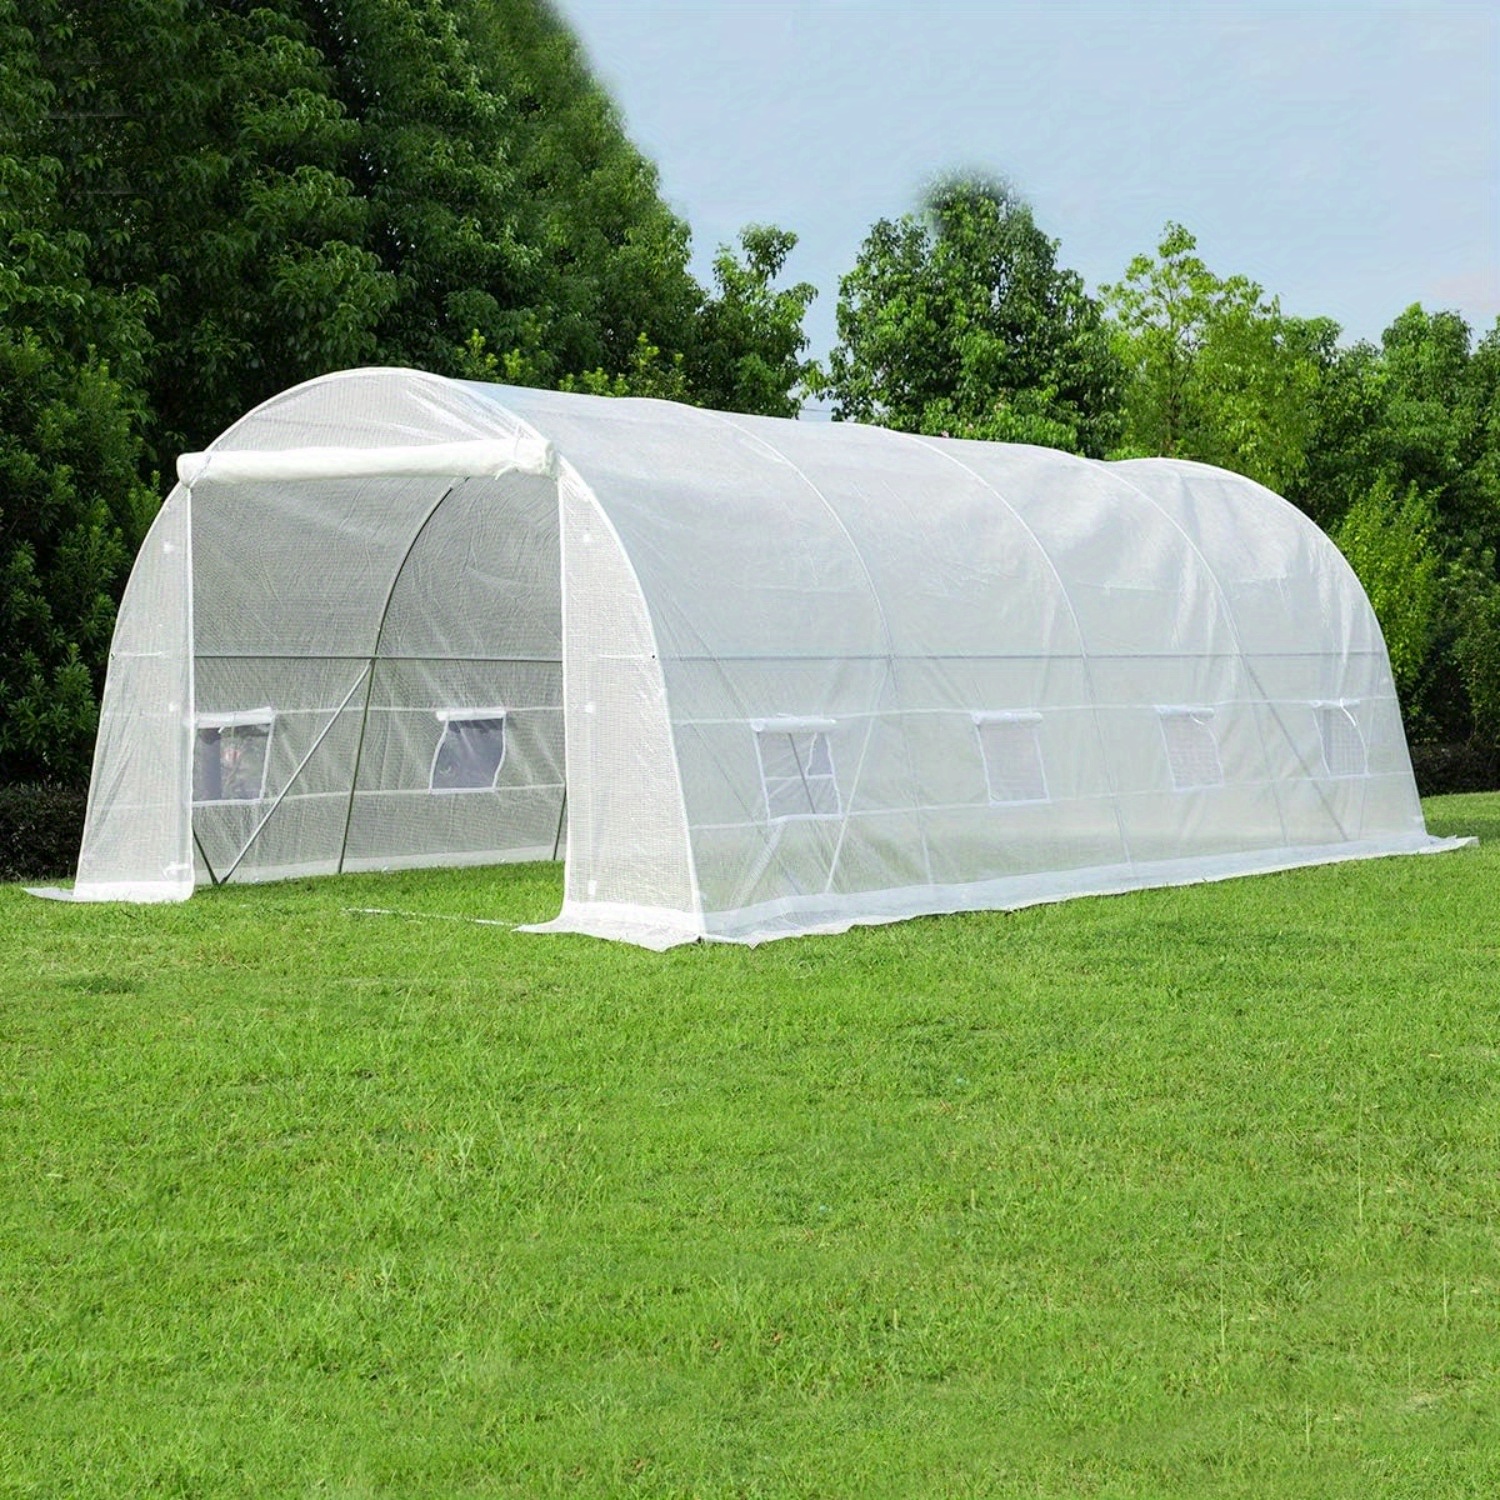 

20' X 10' X 7' Greenhouse Large Gardening Plant Hot House Portable Walking In , Green House For Outside Winter Heavy-duty With Reinforced Frame & 8 Screen Windows, White